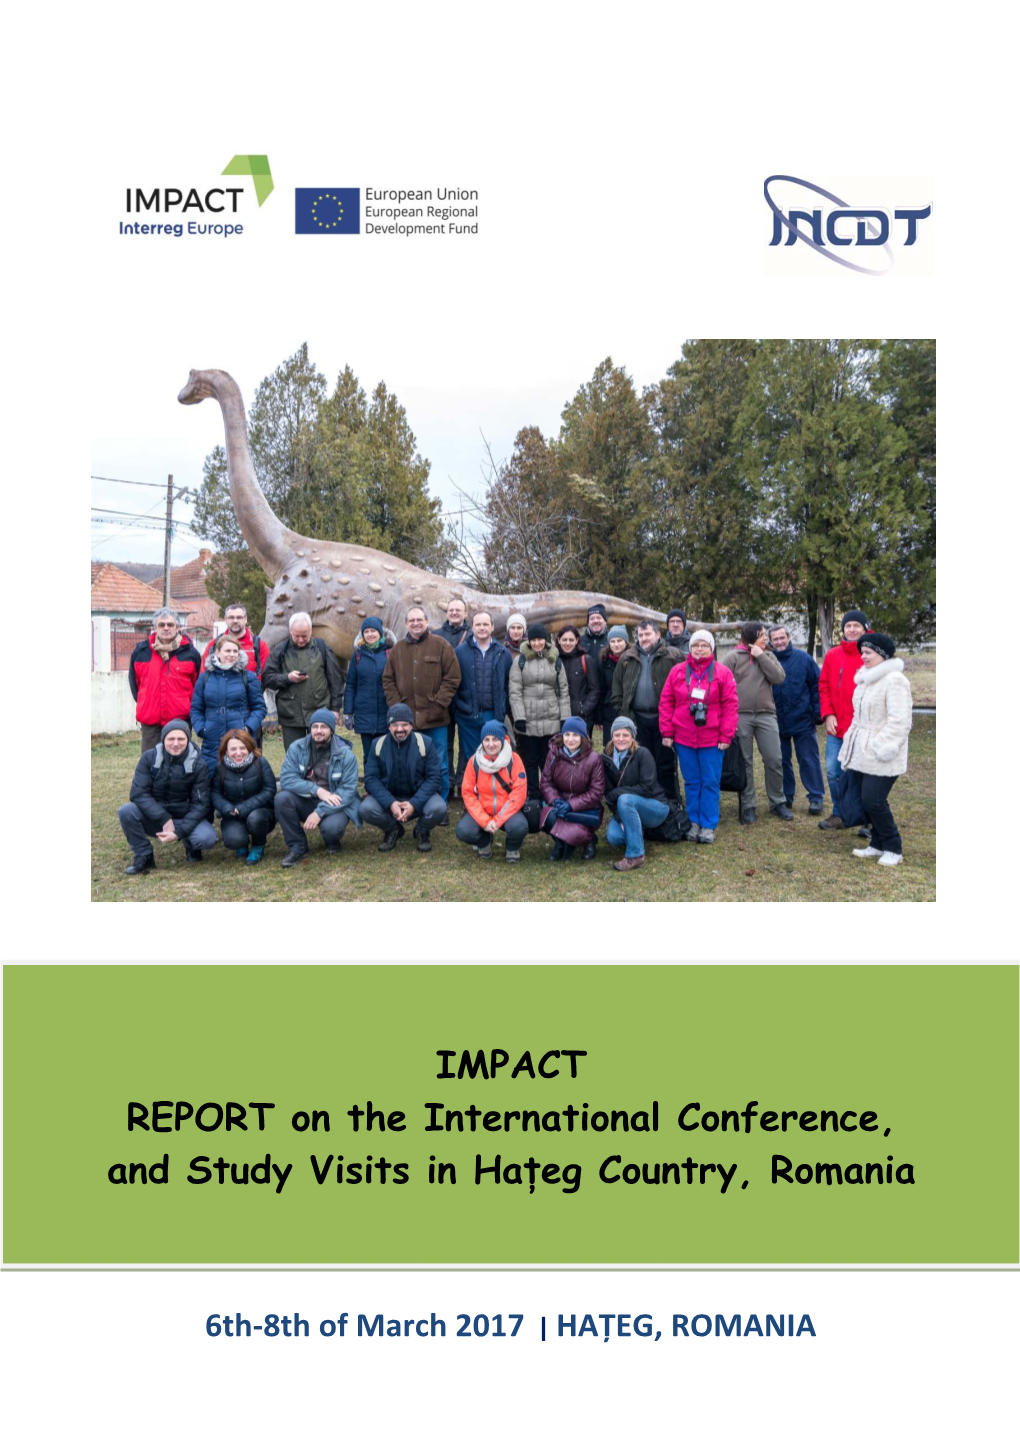 IMPACT REPORT on the International Conference, and Study Visits in Hațeg Country, Romania